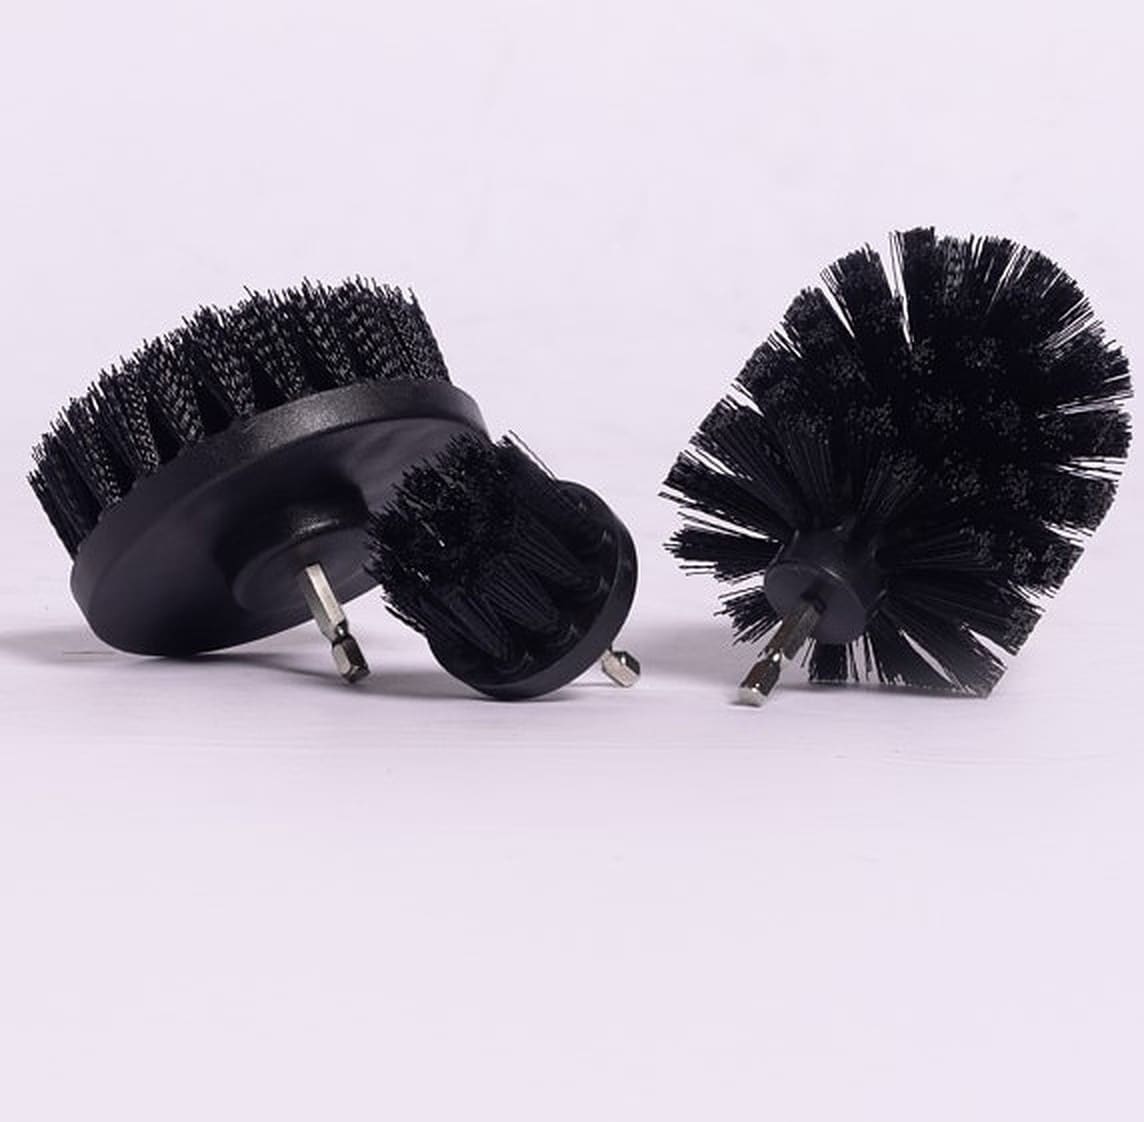 Diamond Shine 3.5 Corner Brush with 6 Extended Reach Attachment